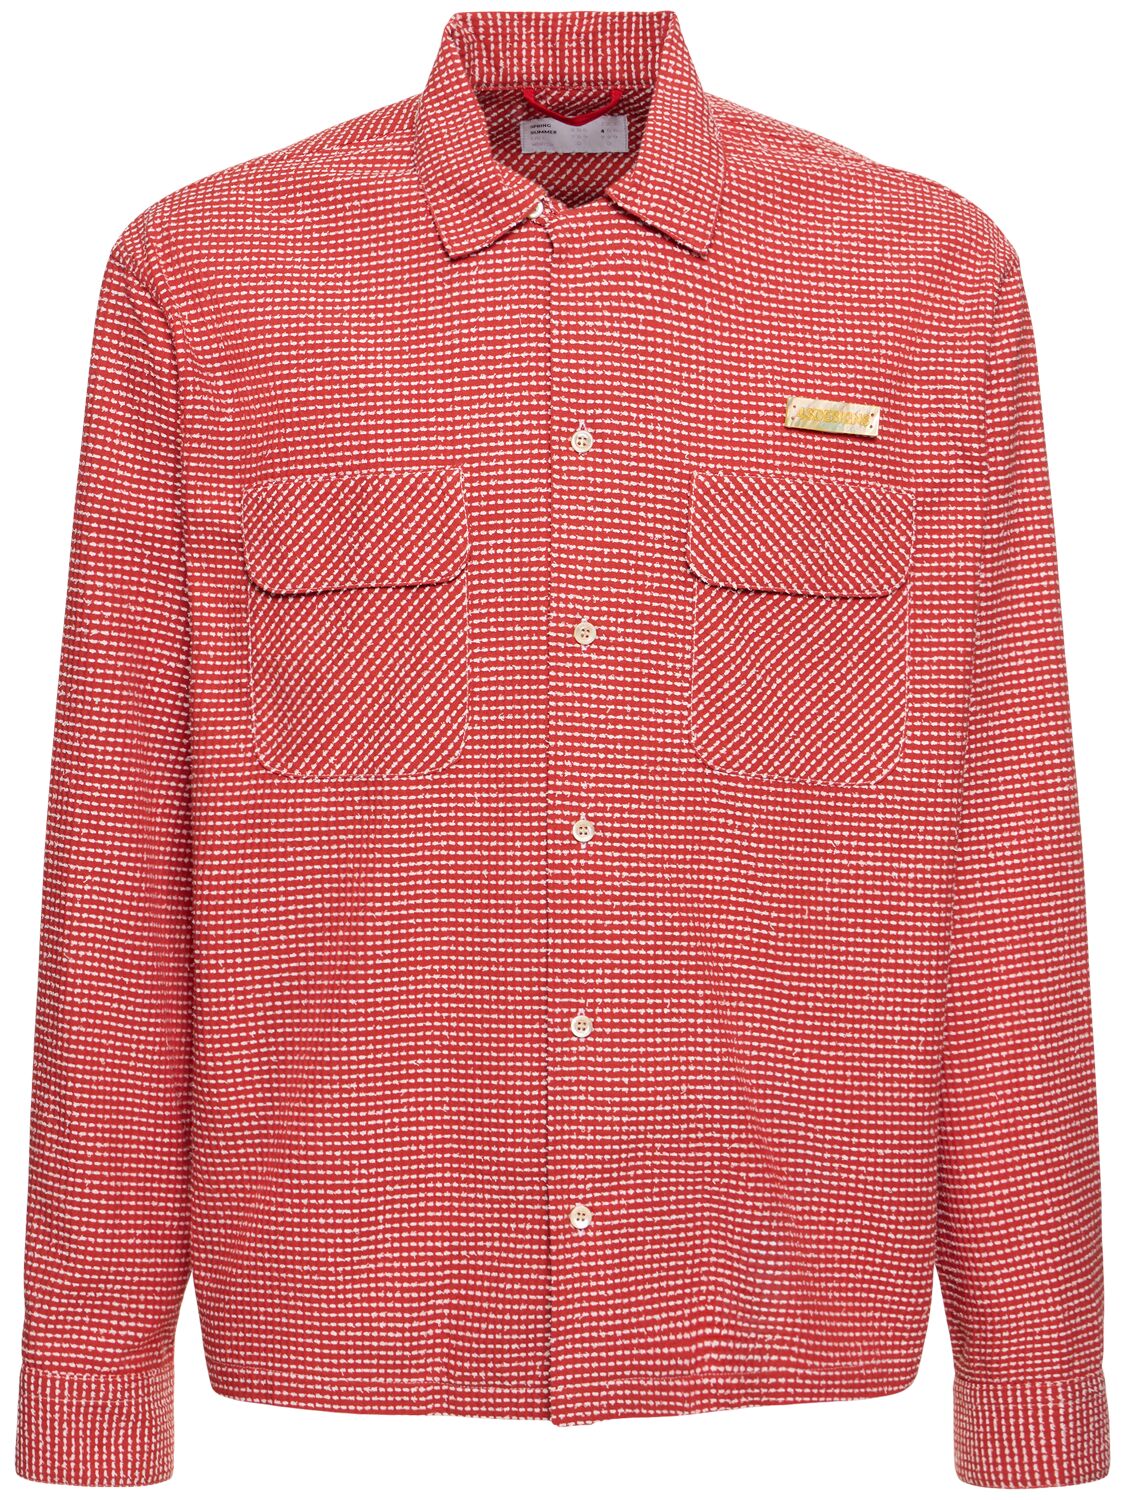 4sdesigns Cotton Bouclé Shirt In Red